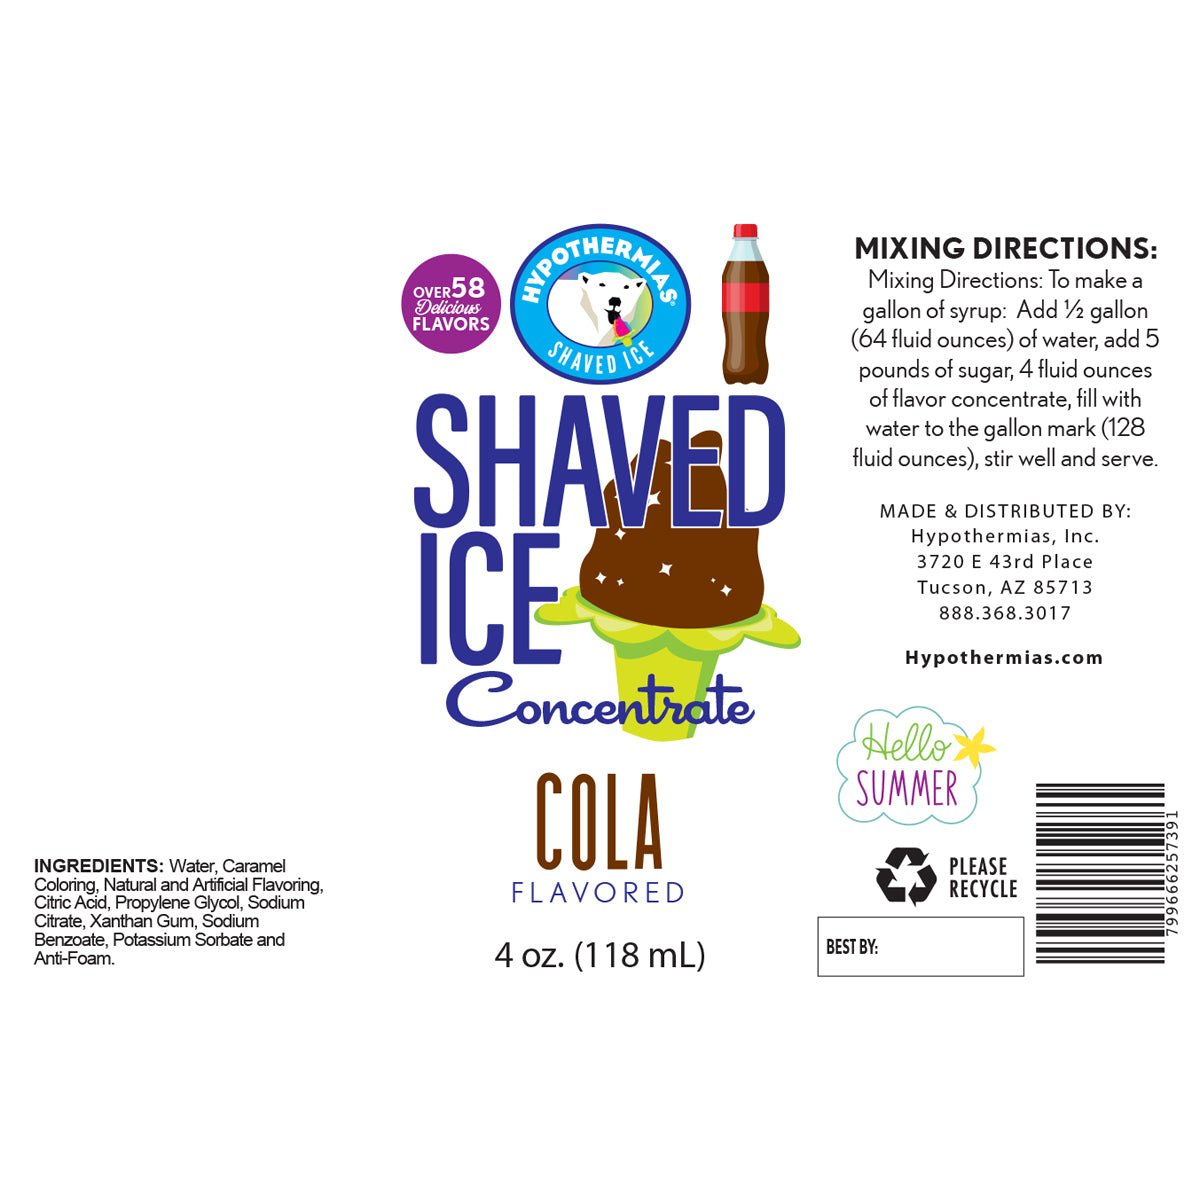 Hypothermias cola shaved ice or snow cone flavor syrup concentrate ingredient label.